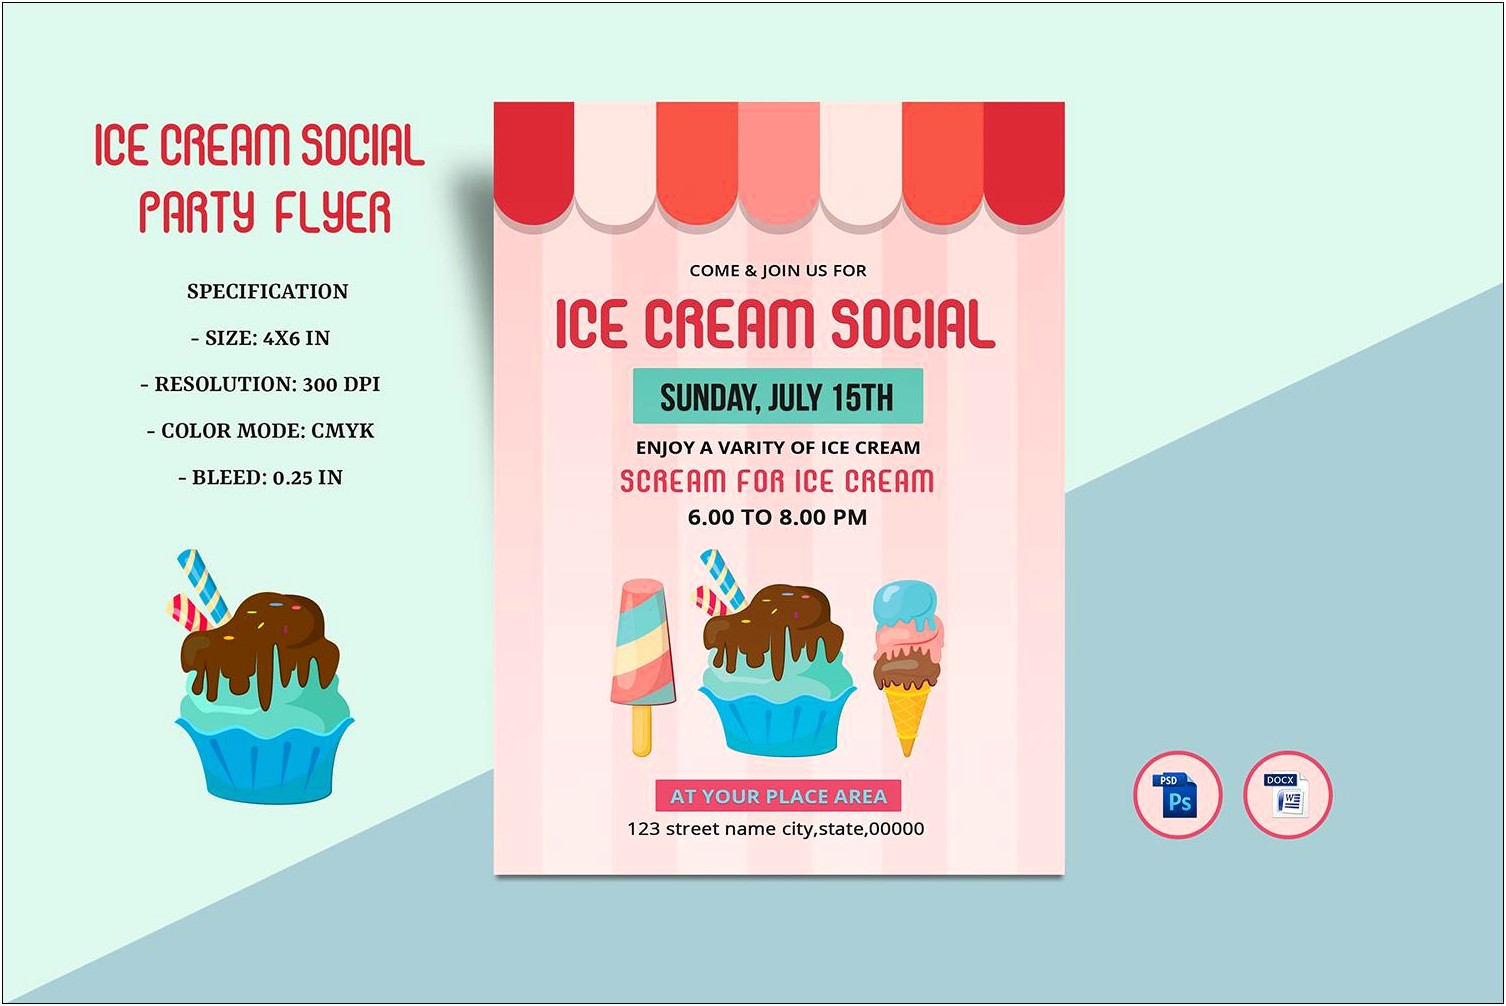 Ice Cream Party Flyer Template Free